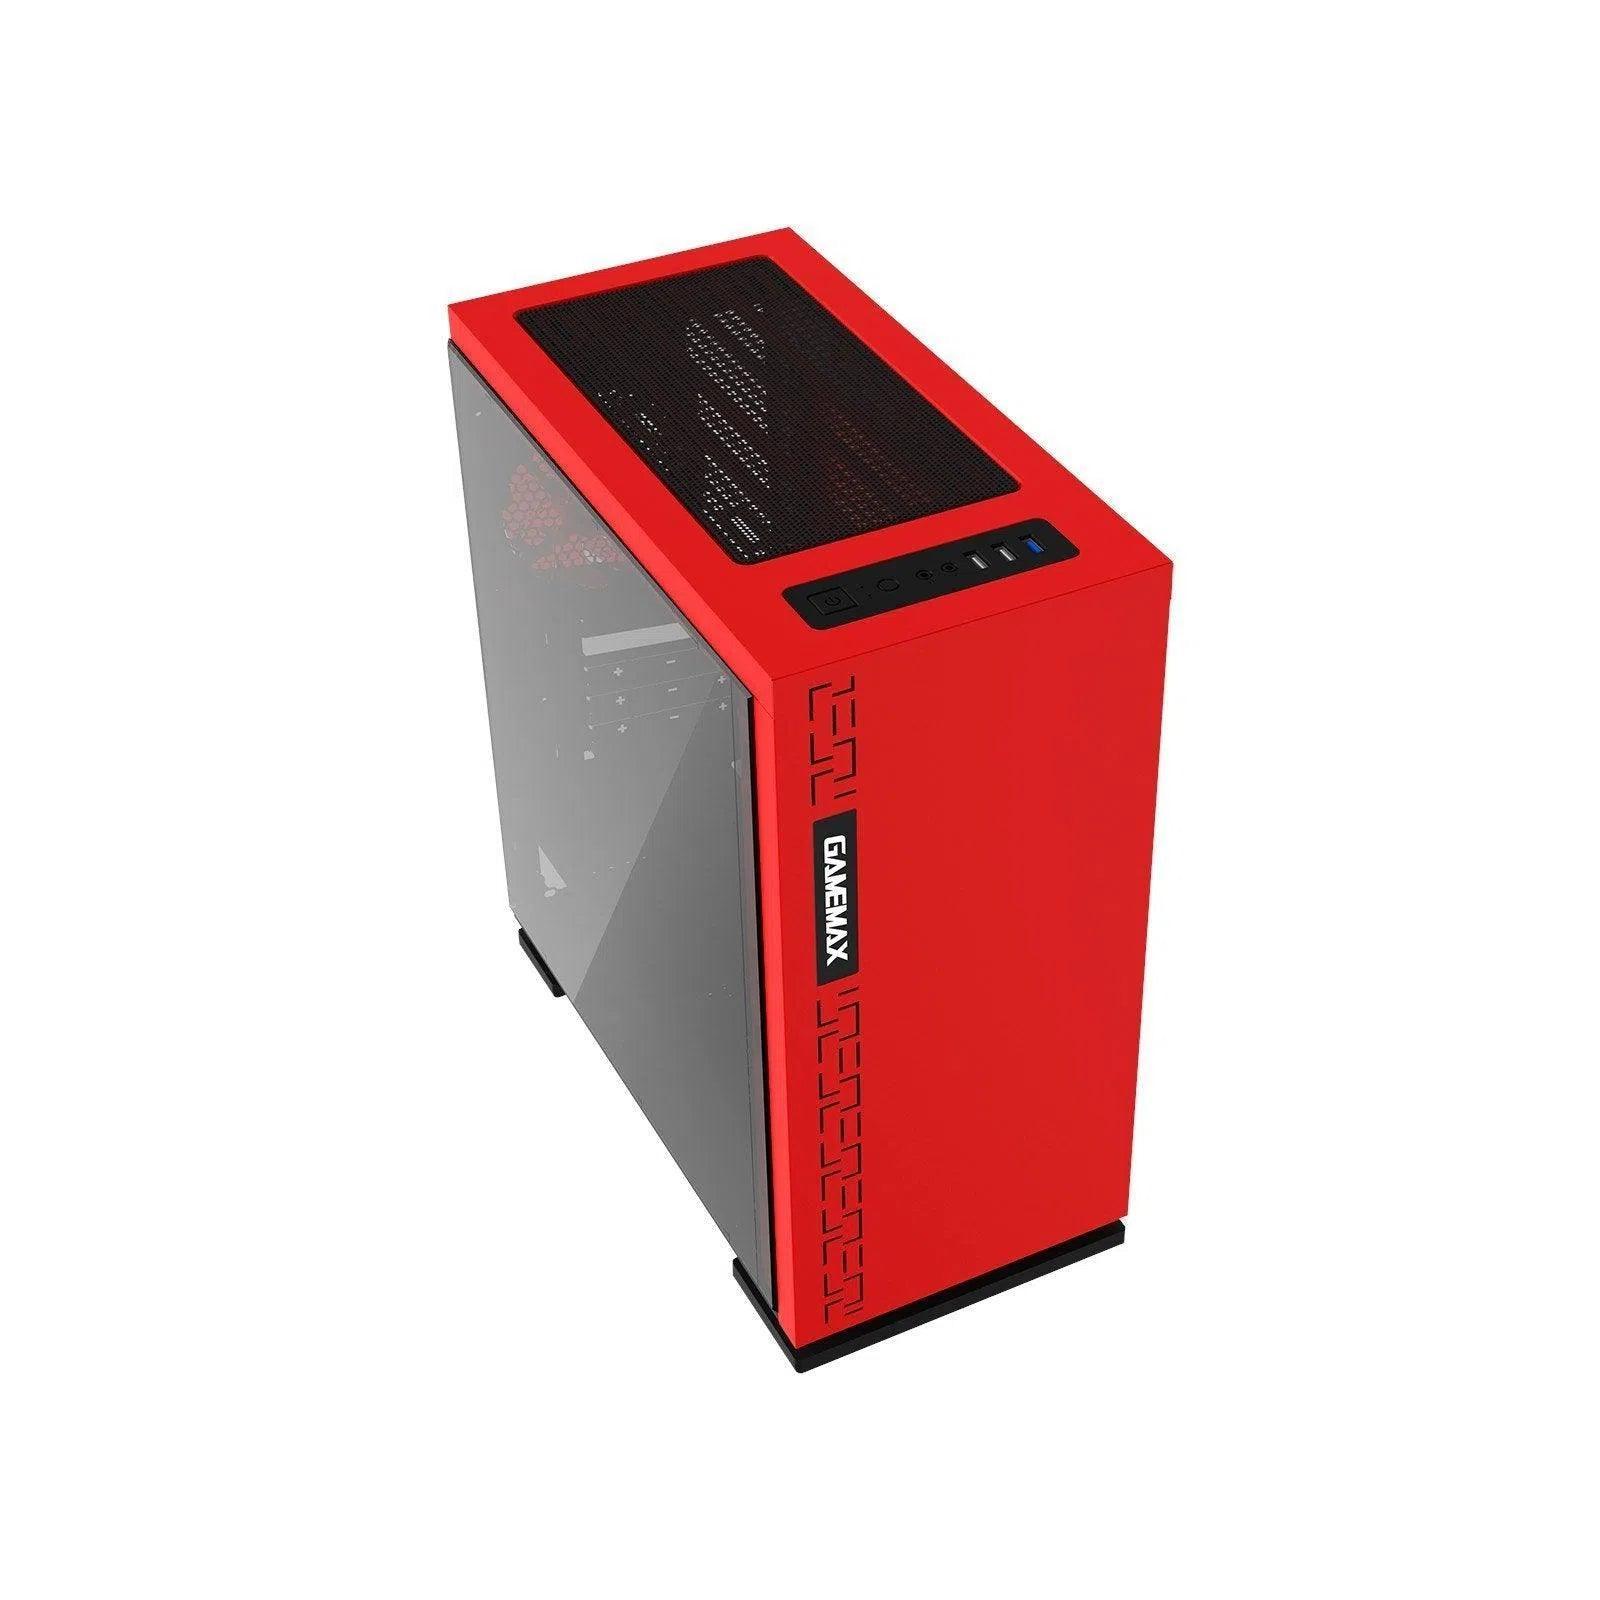 TIO Expedition Red Intel i5 3.20GHz GTX 1030 2GB Gaming PC - TIO